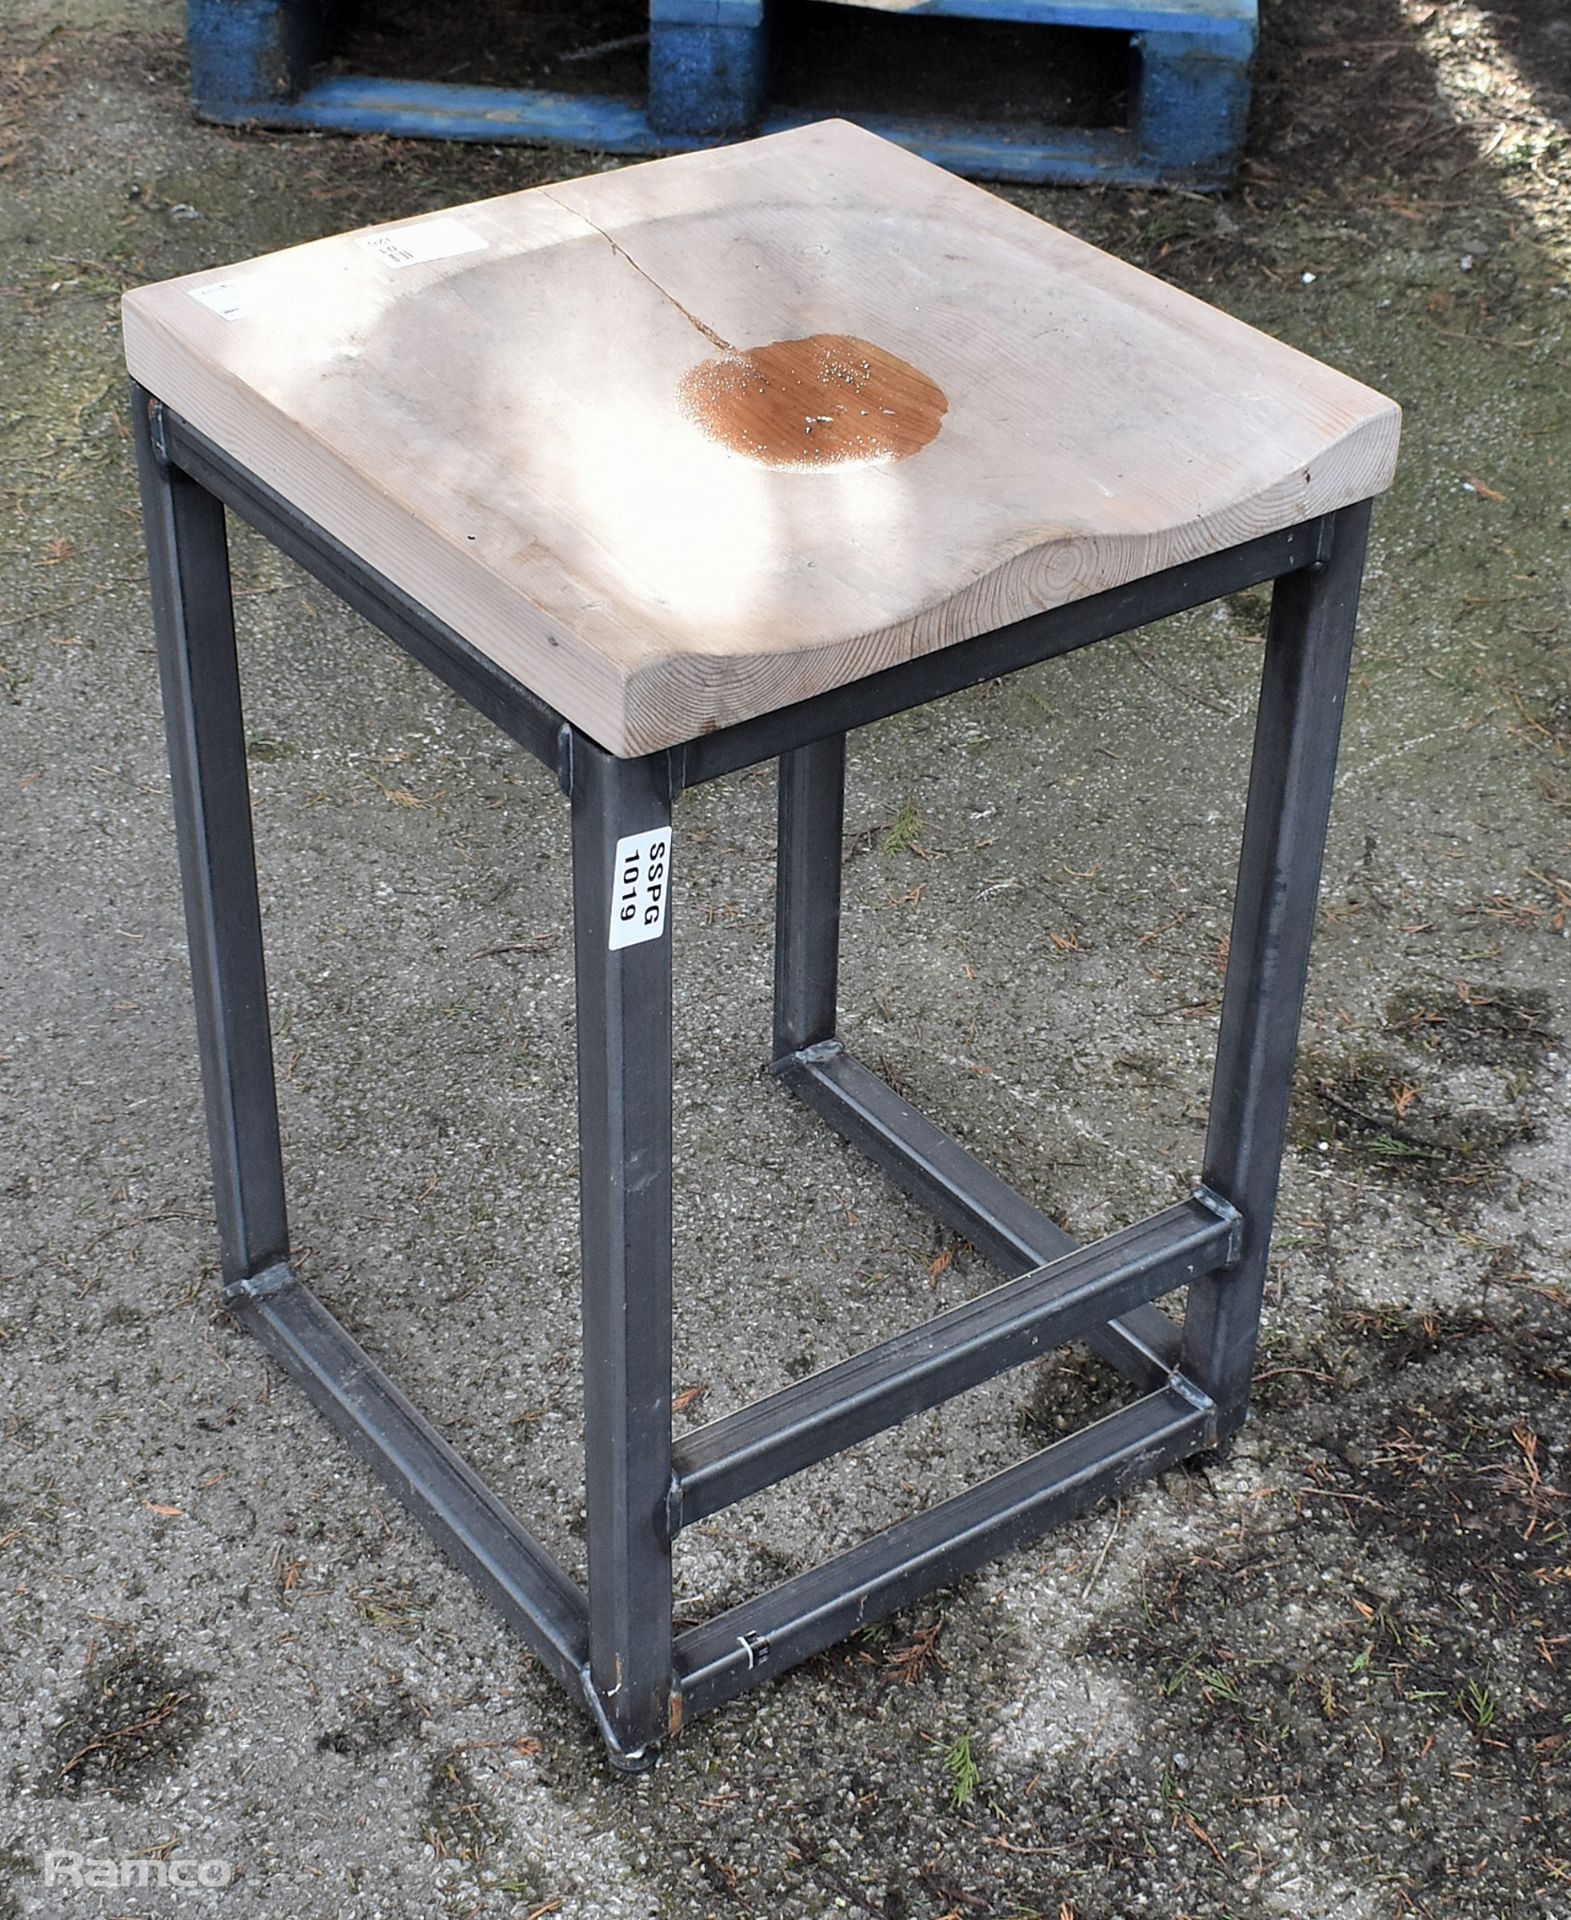 Metal frame stool with wooden seat base - 40 x 40 x 62cm - Image 3 of 3